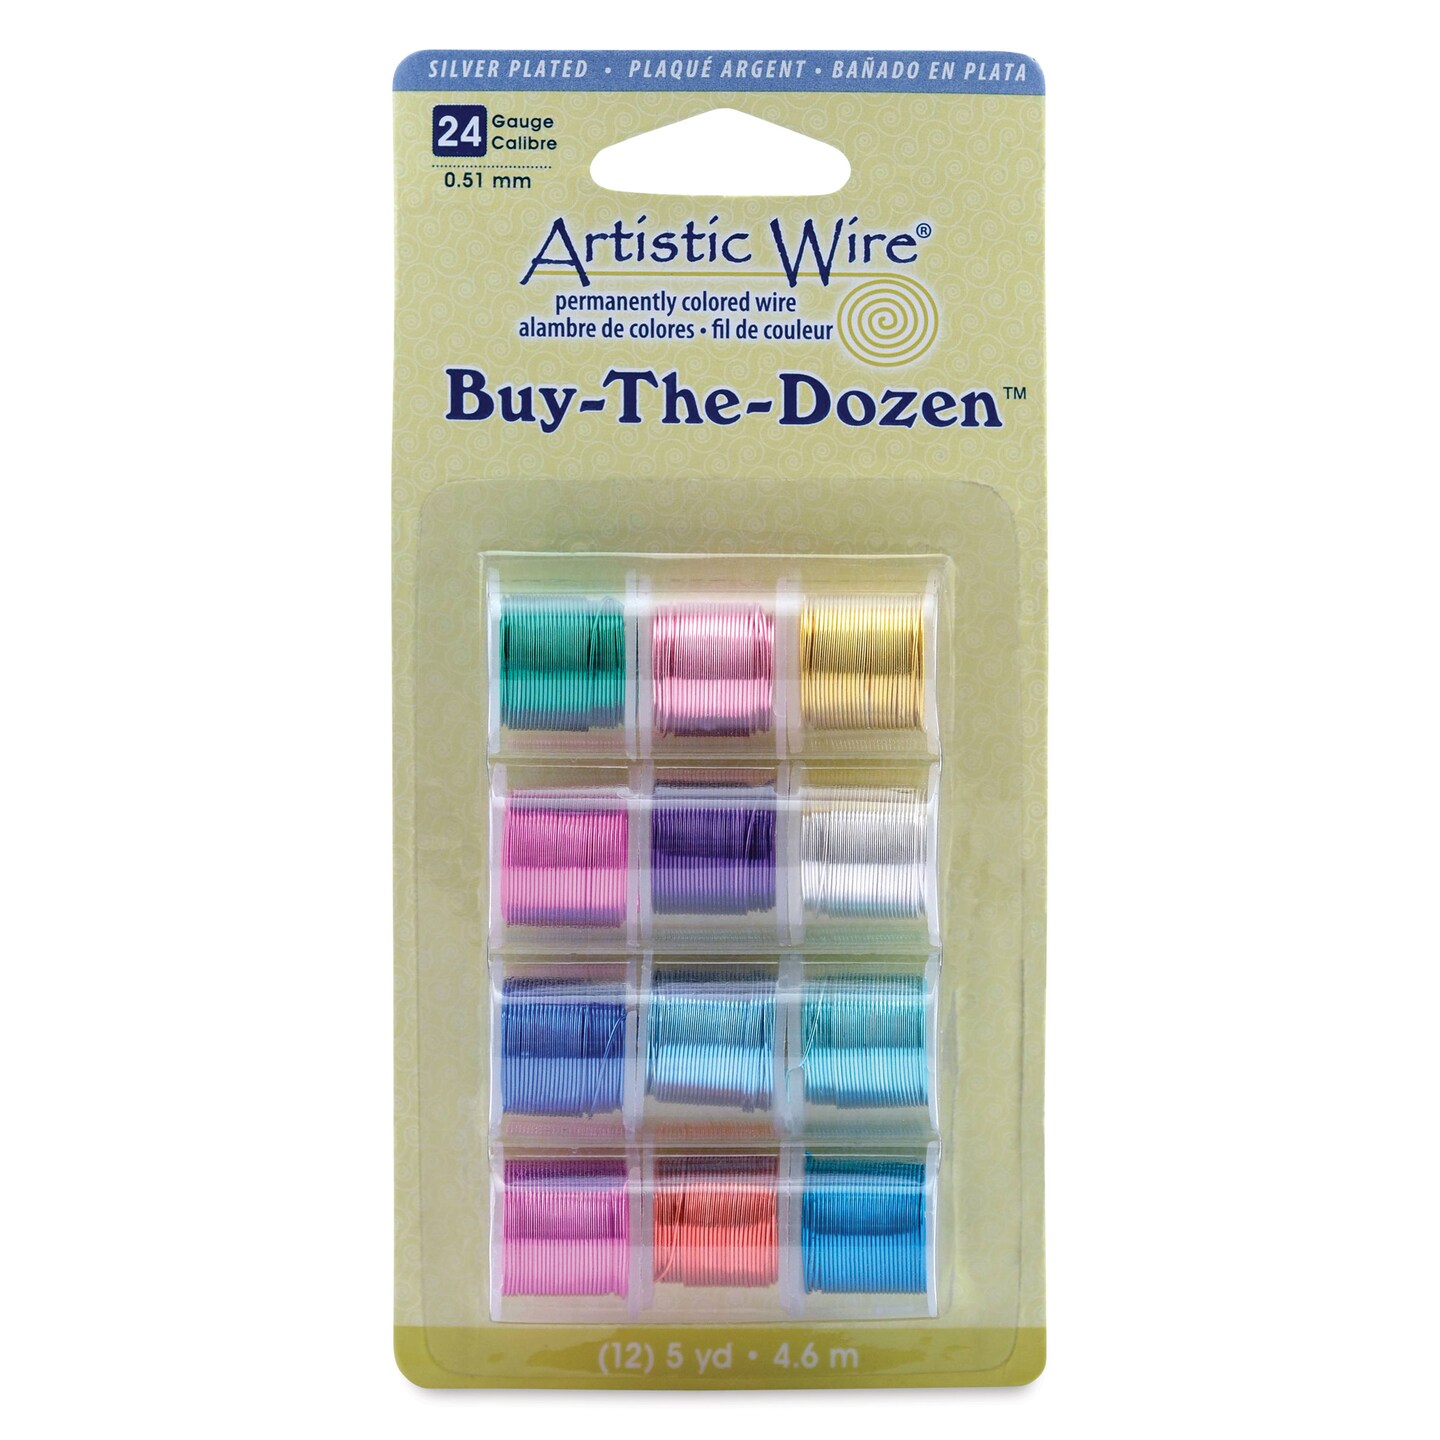 Artistic Wire Silver Plated Copper Craft Wire - Buy-The-Dozen, Assorted Colors, 24 Gauge, 15 ft, Set of 12